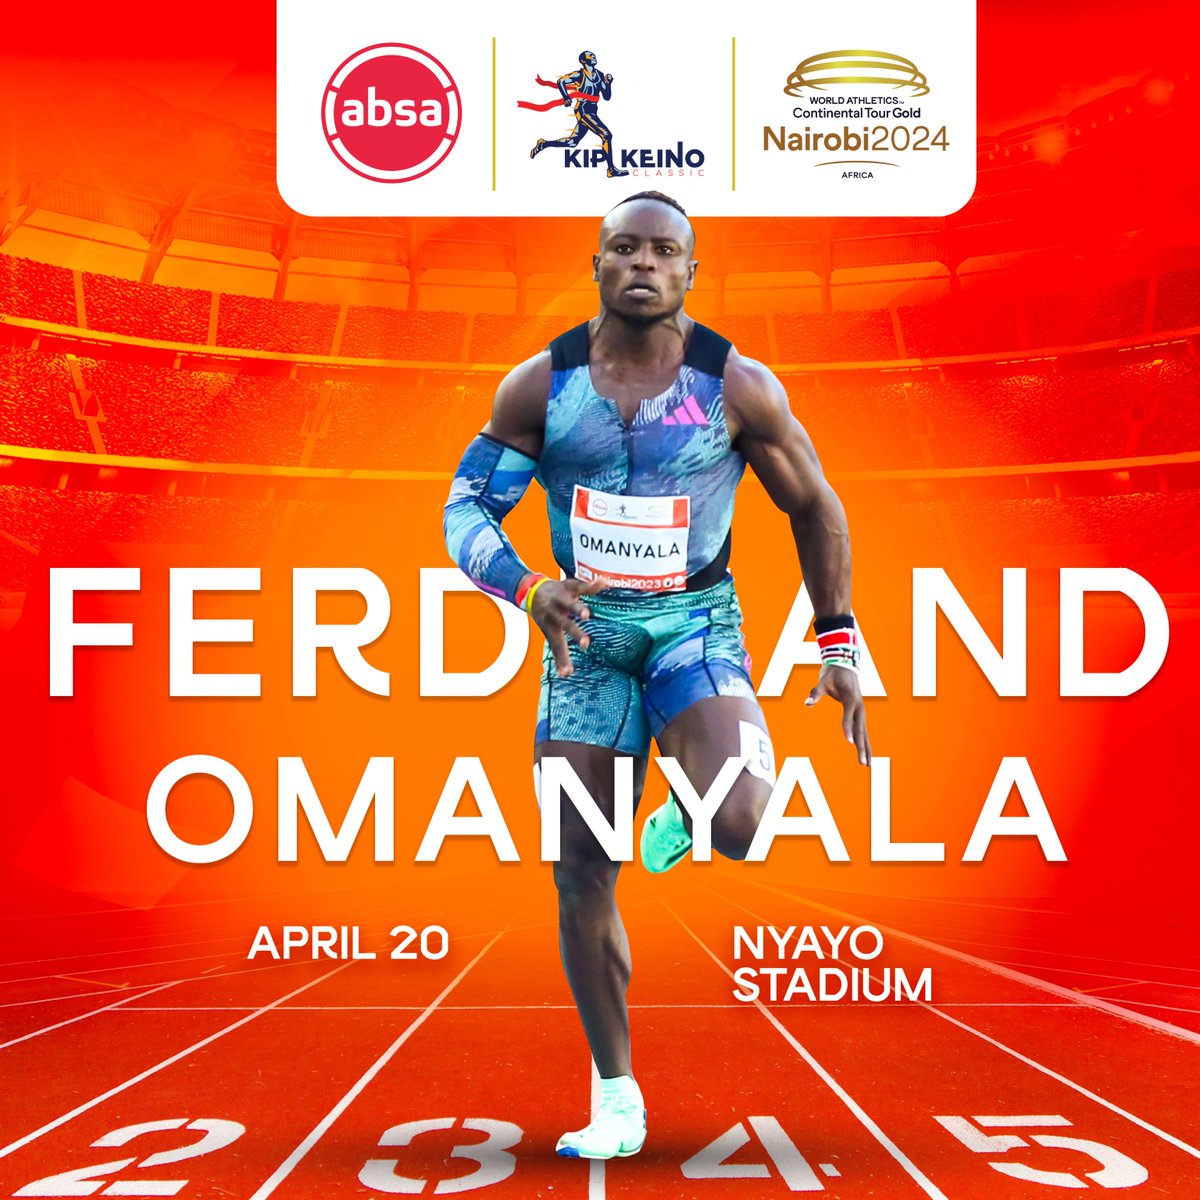 The Champ is Here! We are excited to announce that @ferdiomanyala, a true powerhouse in athletics, will participate in the highly anticipated #AbsaKipkeinoClassic2024. Men's 100M is about to get litty #TwendeNyayoStadium